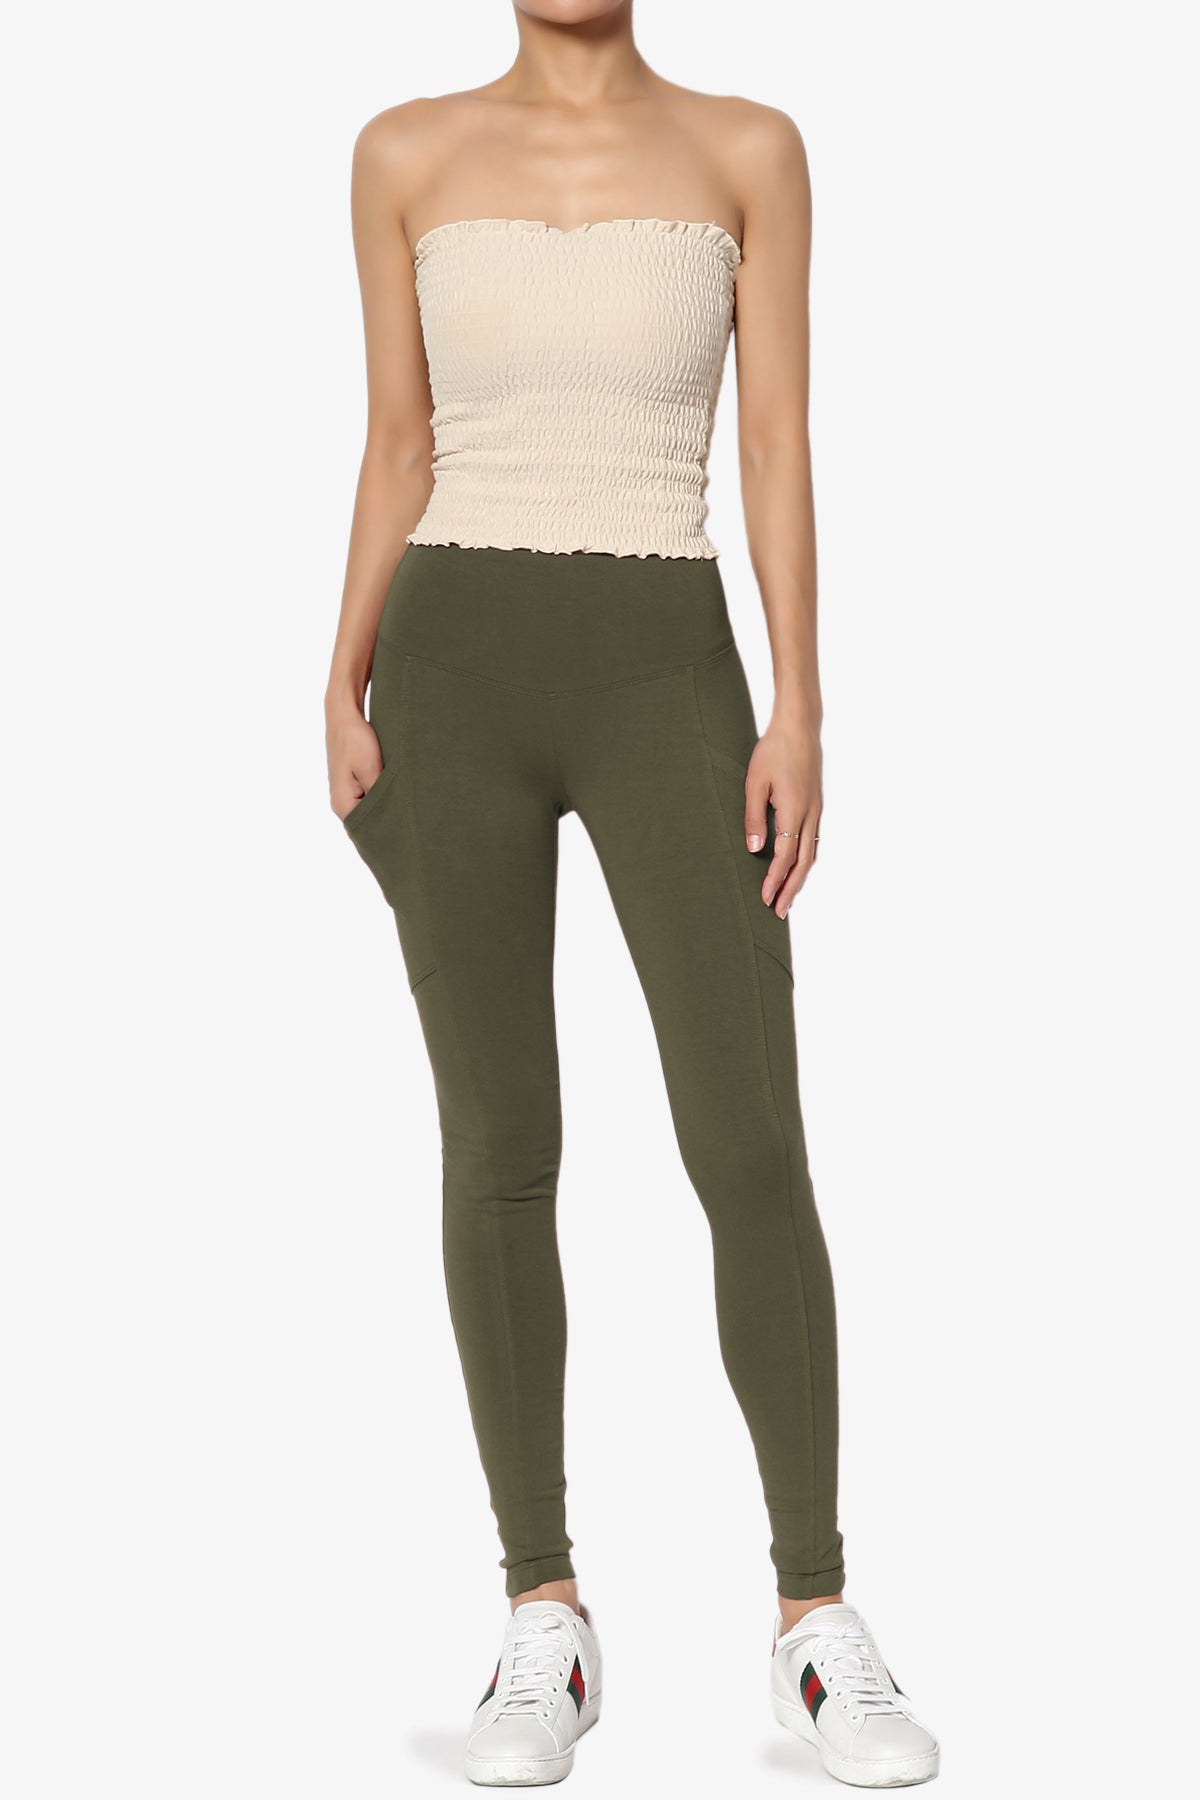 Ansley Luxe Cotton Leggings with Pockets OLIVE_6